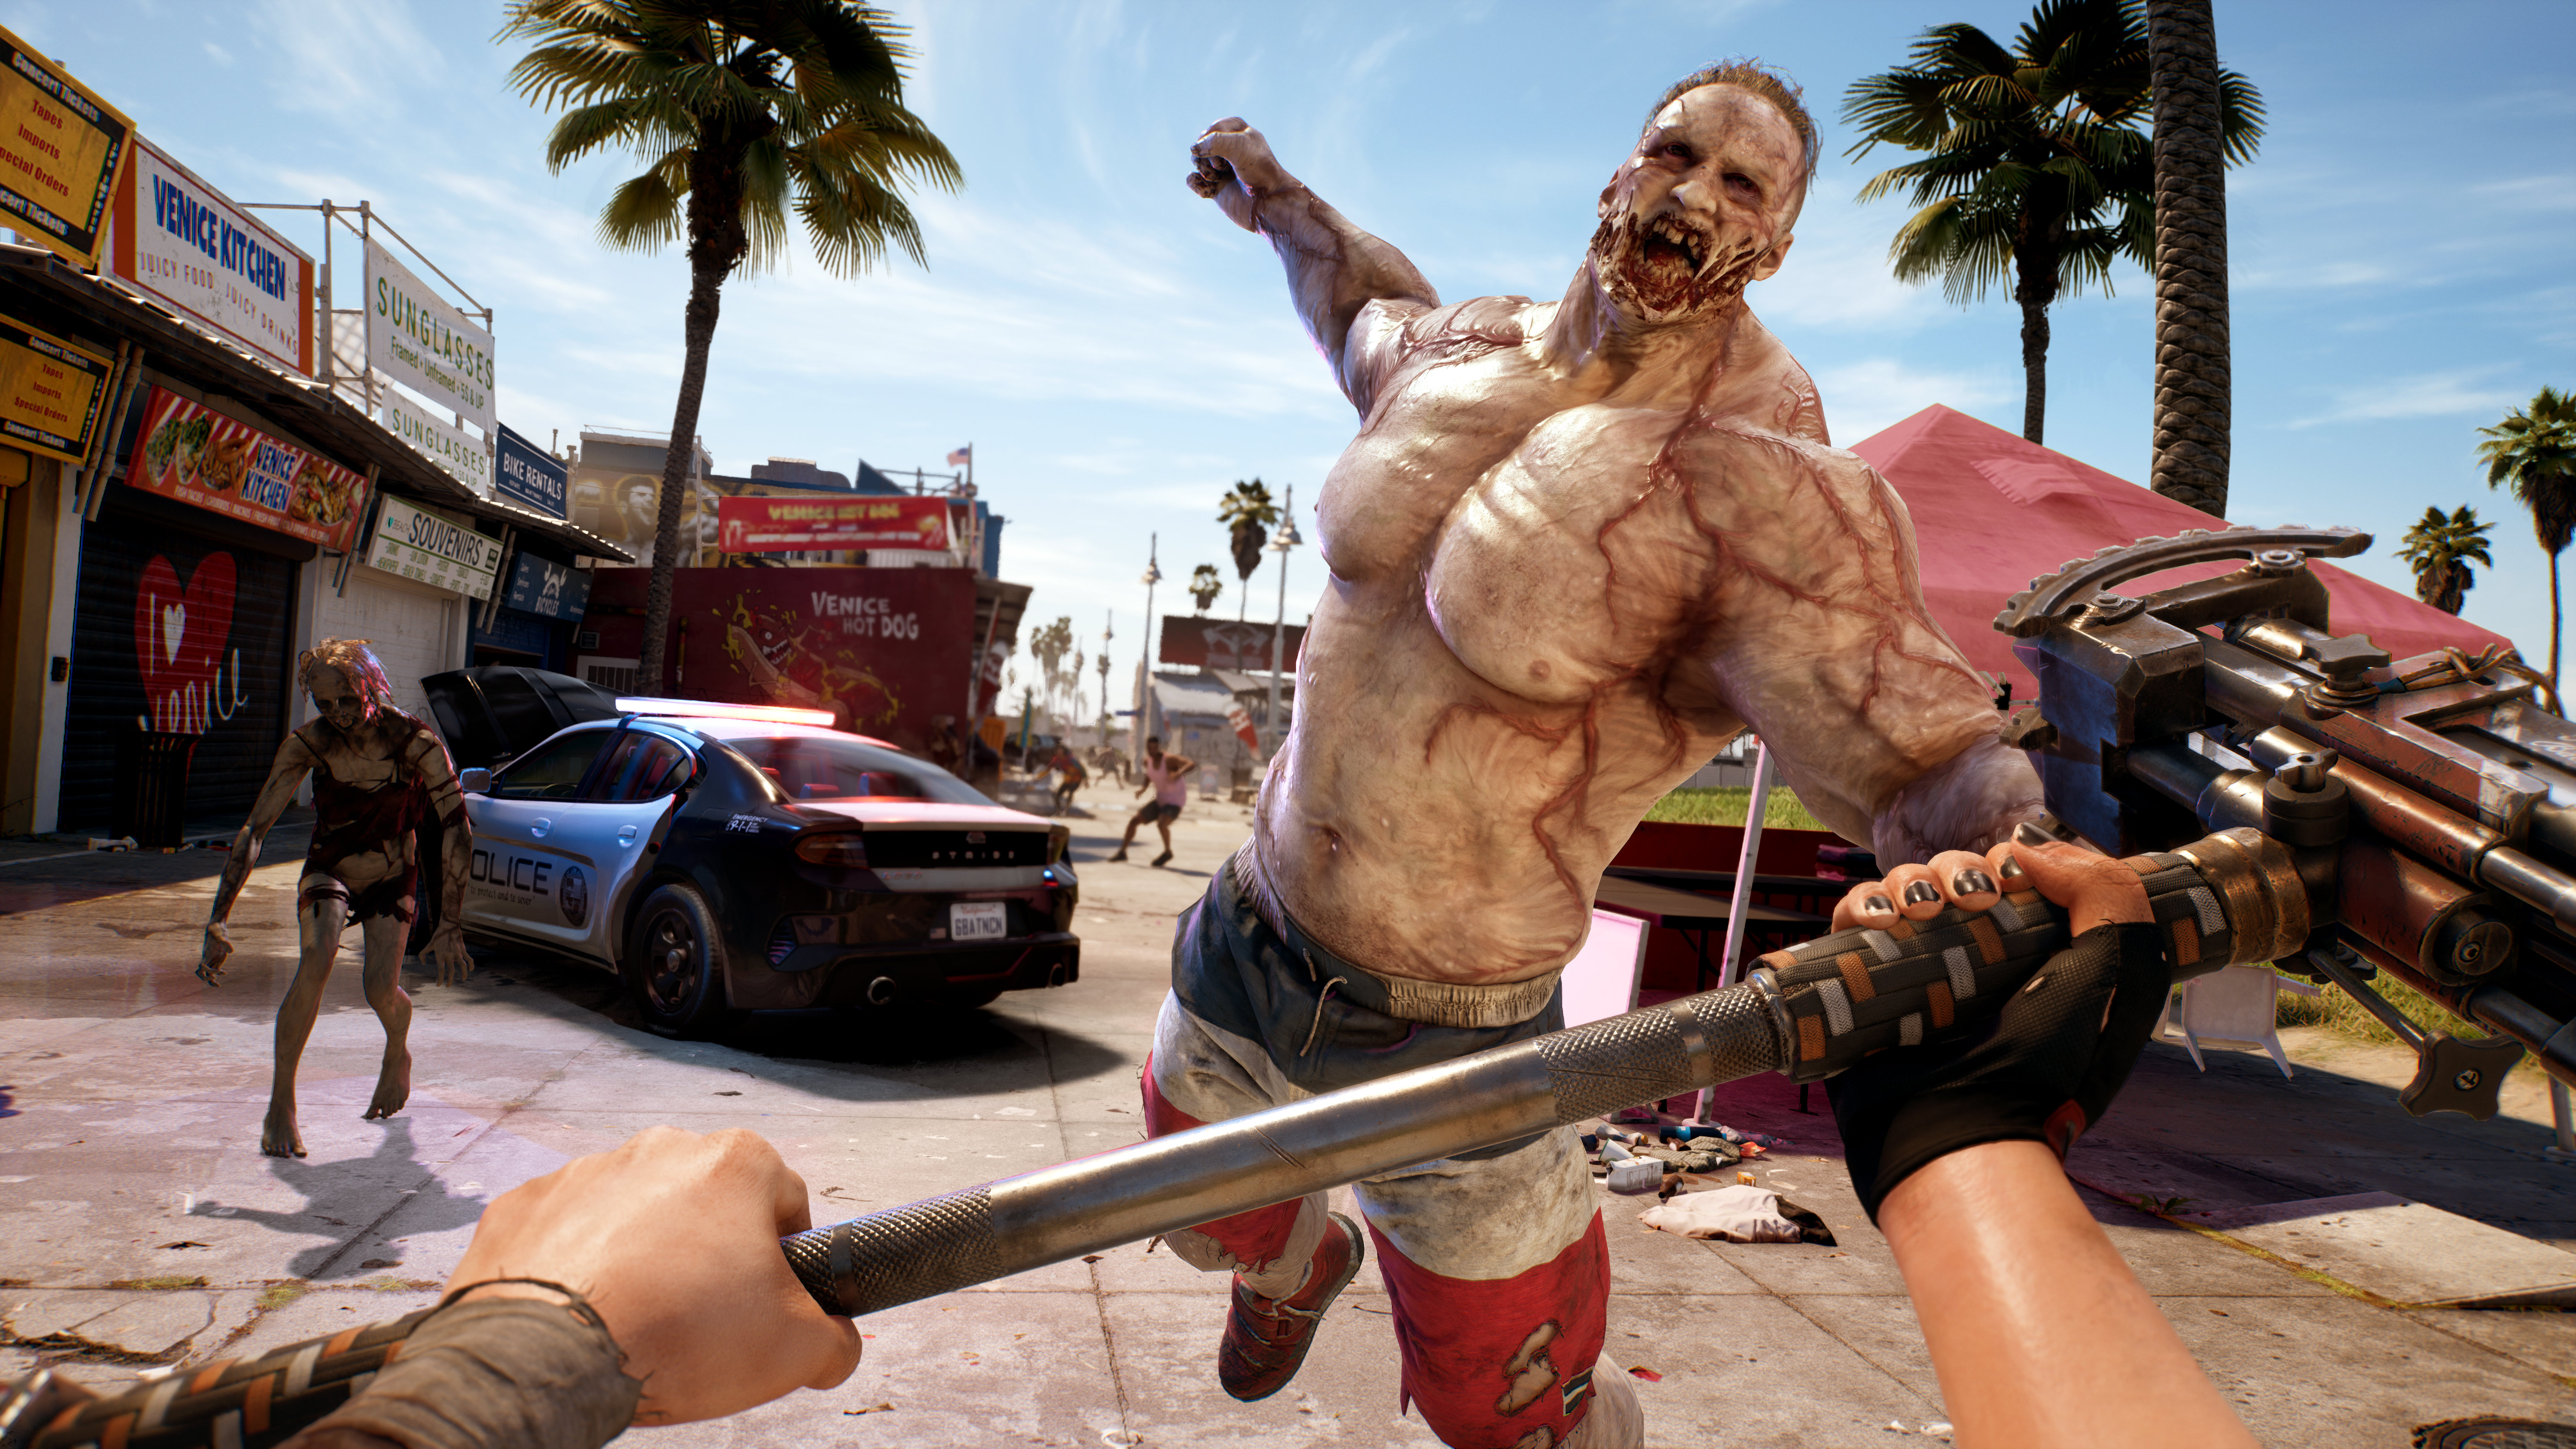 Get your first look at Dead Island 2, launching February 3 on PS4